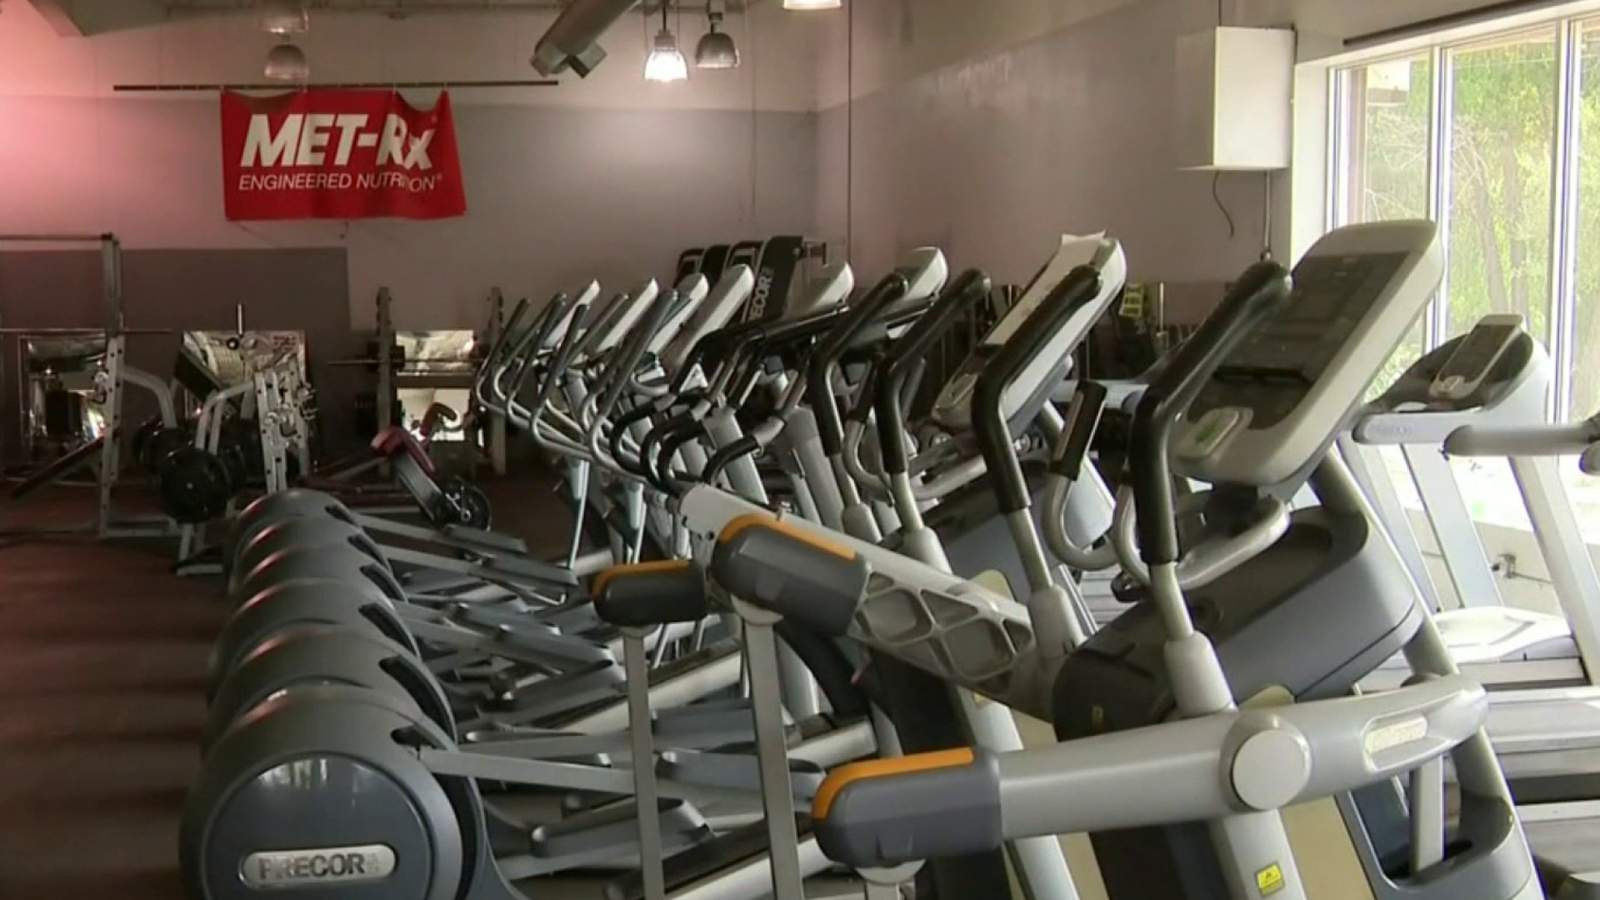 Appeals court grants Michigan Gov. Whitmer’s motion to keep gyms closed